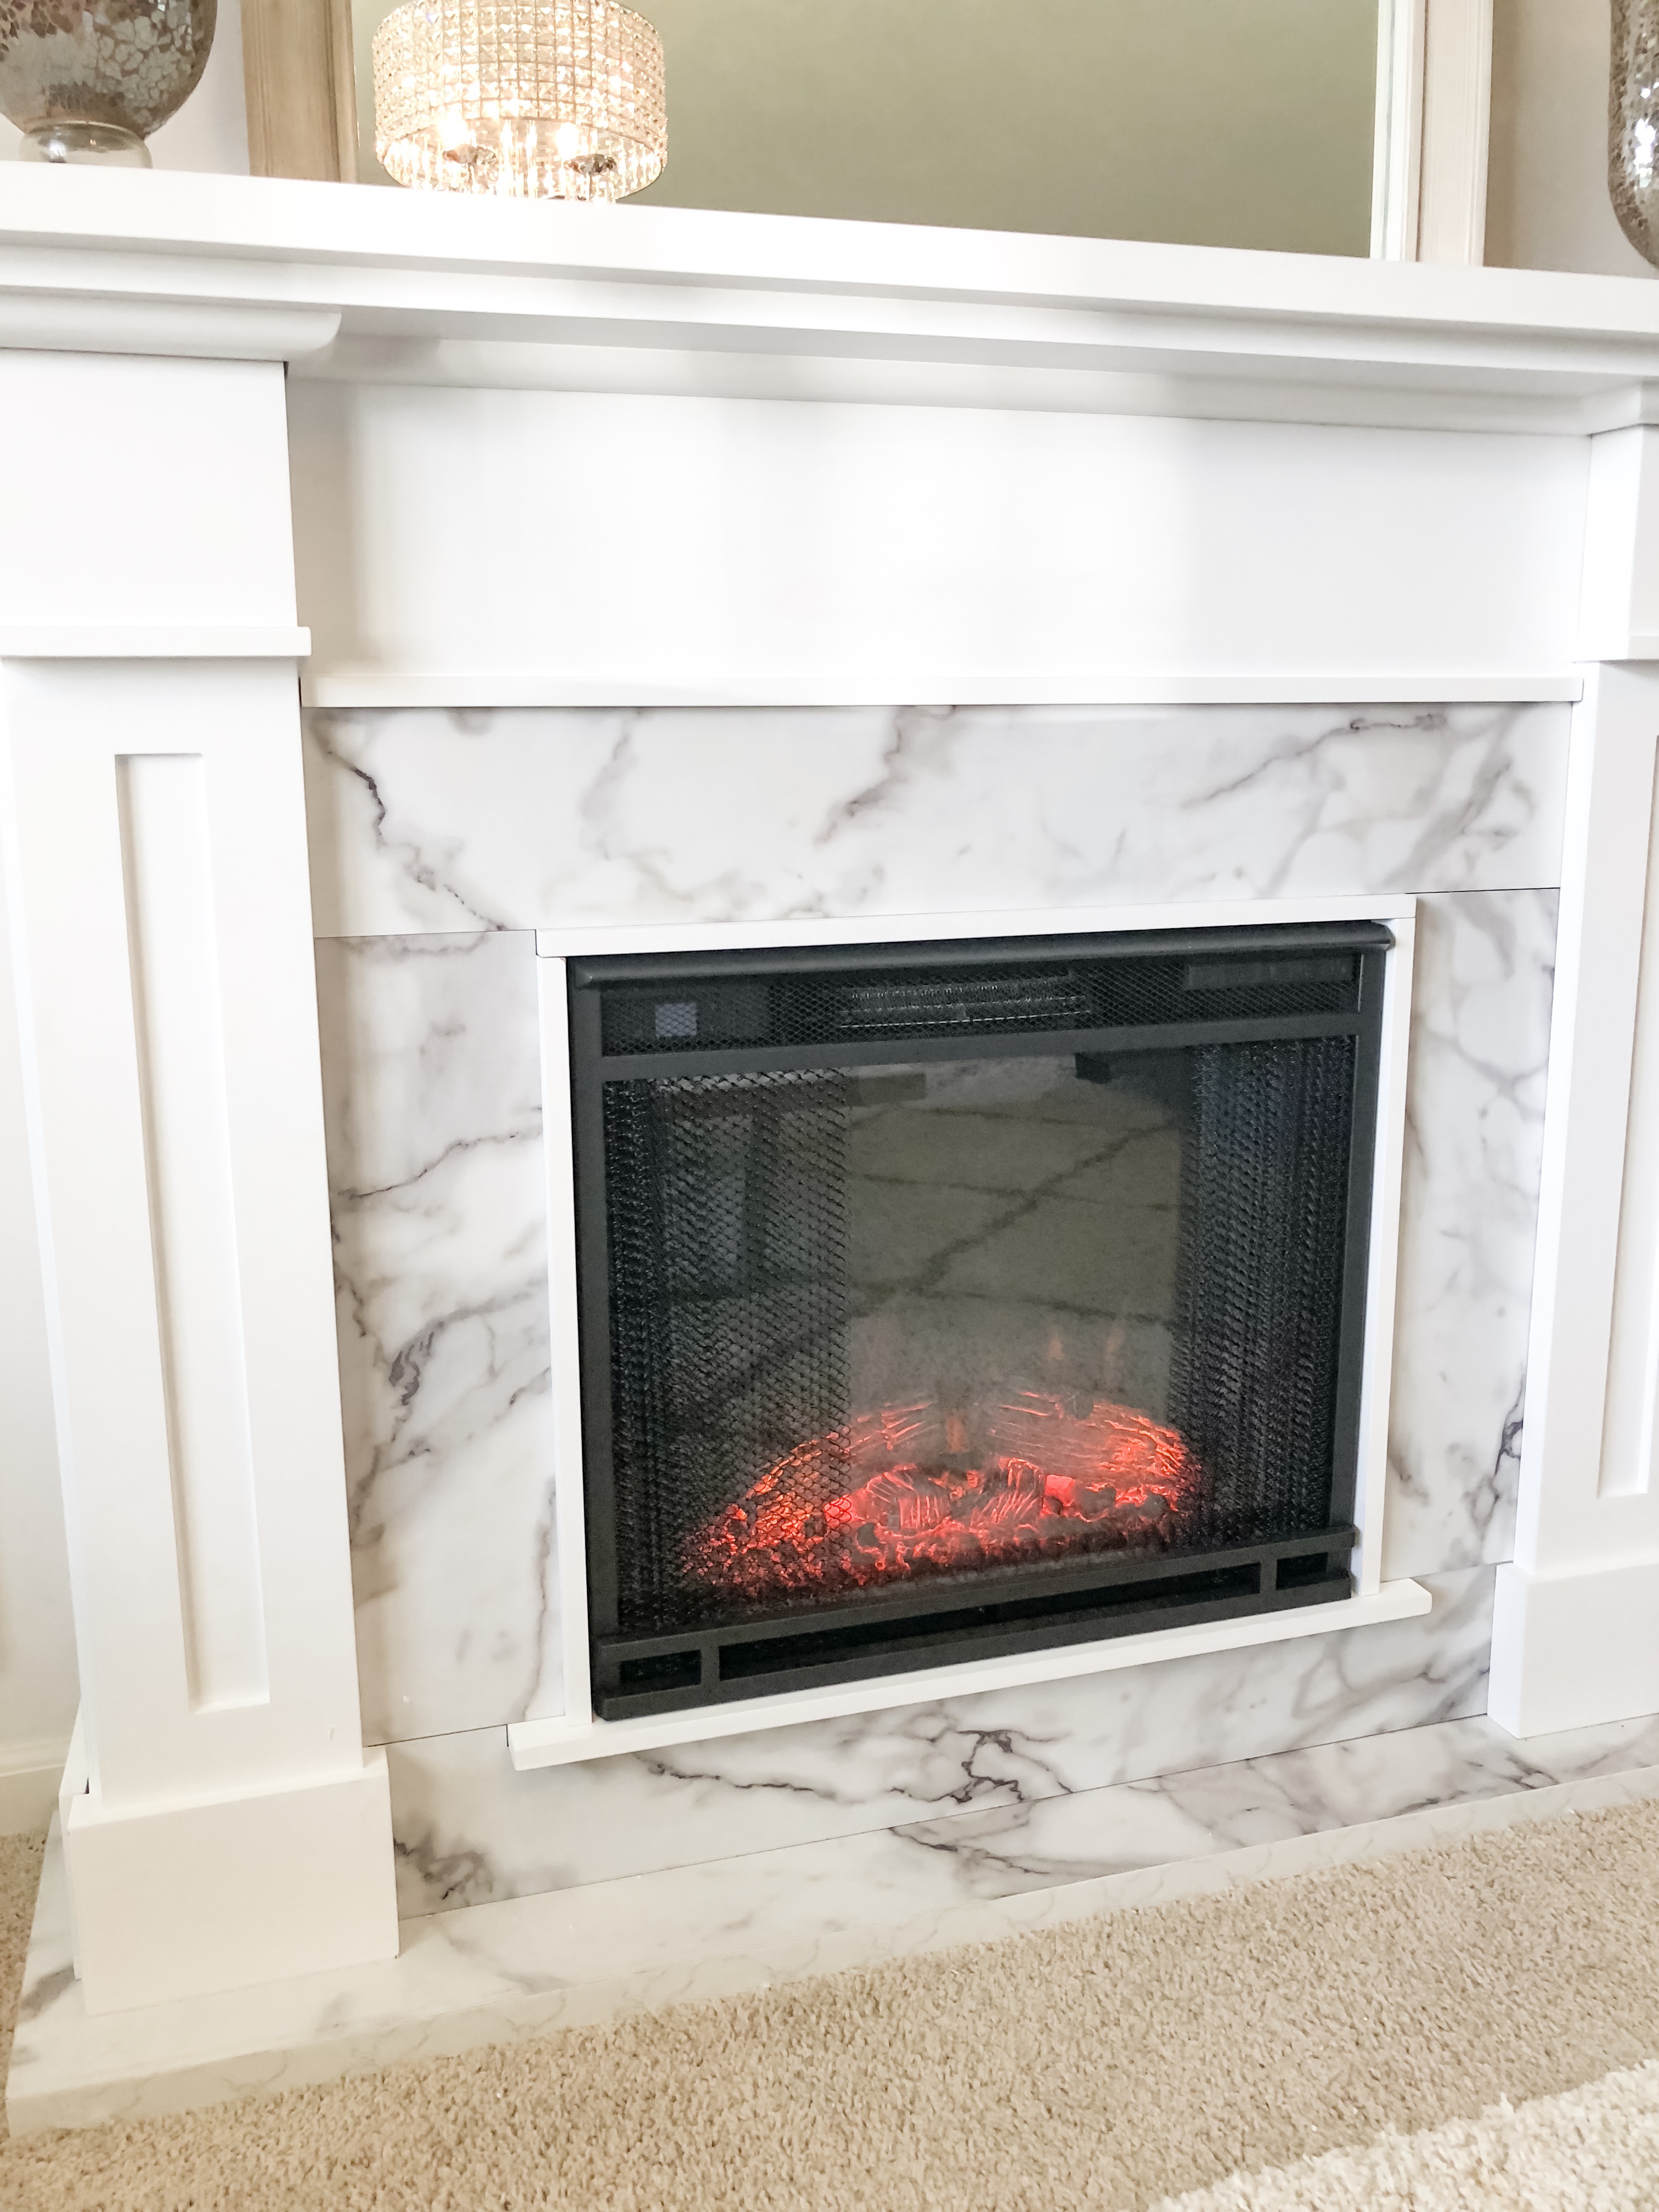 No fireplace? No problem! See how I was able to easily add a fireplace to my space without hiring someone to install one! 